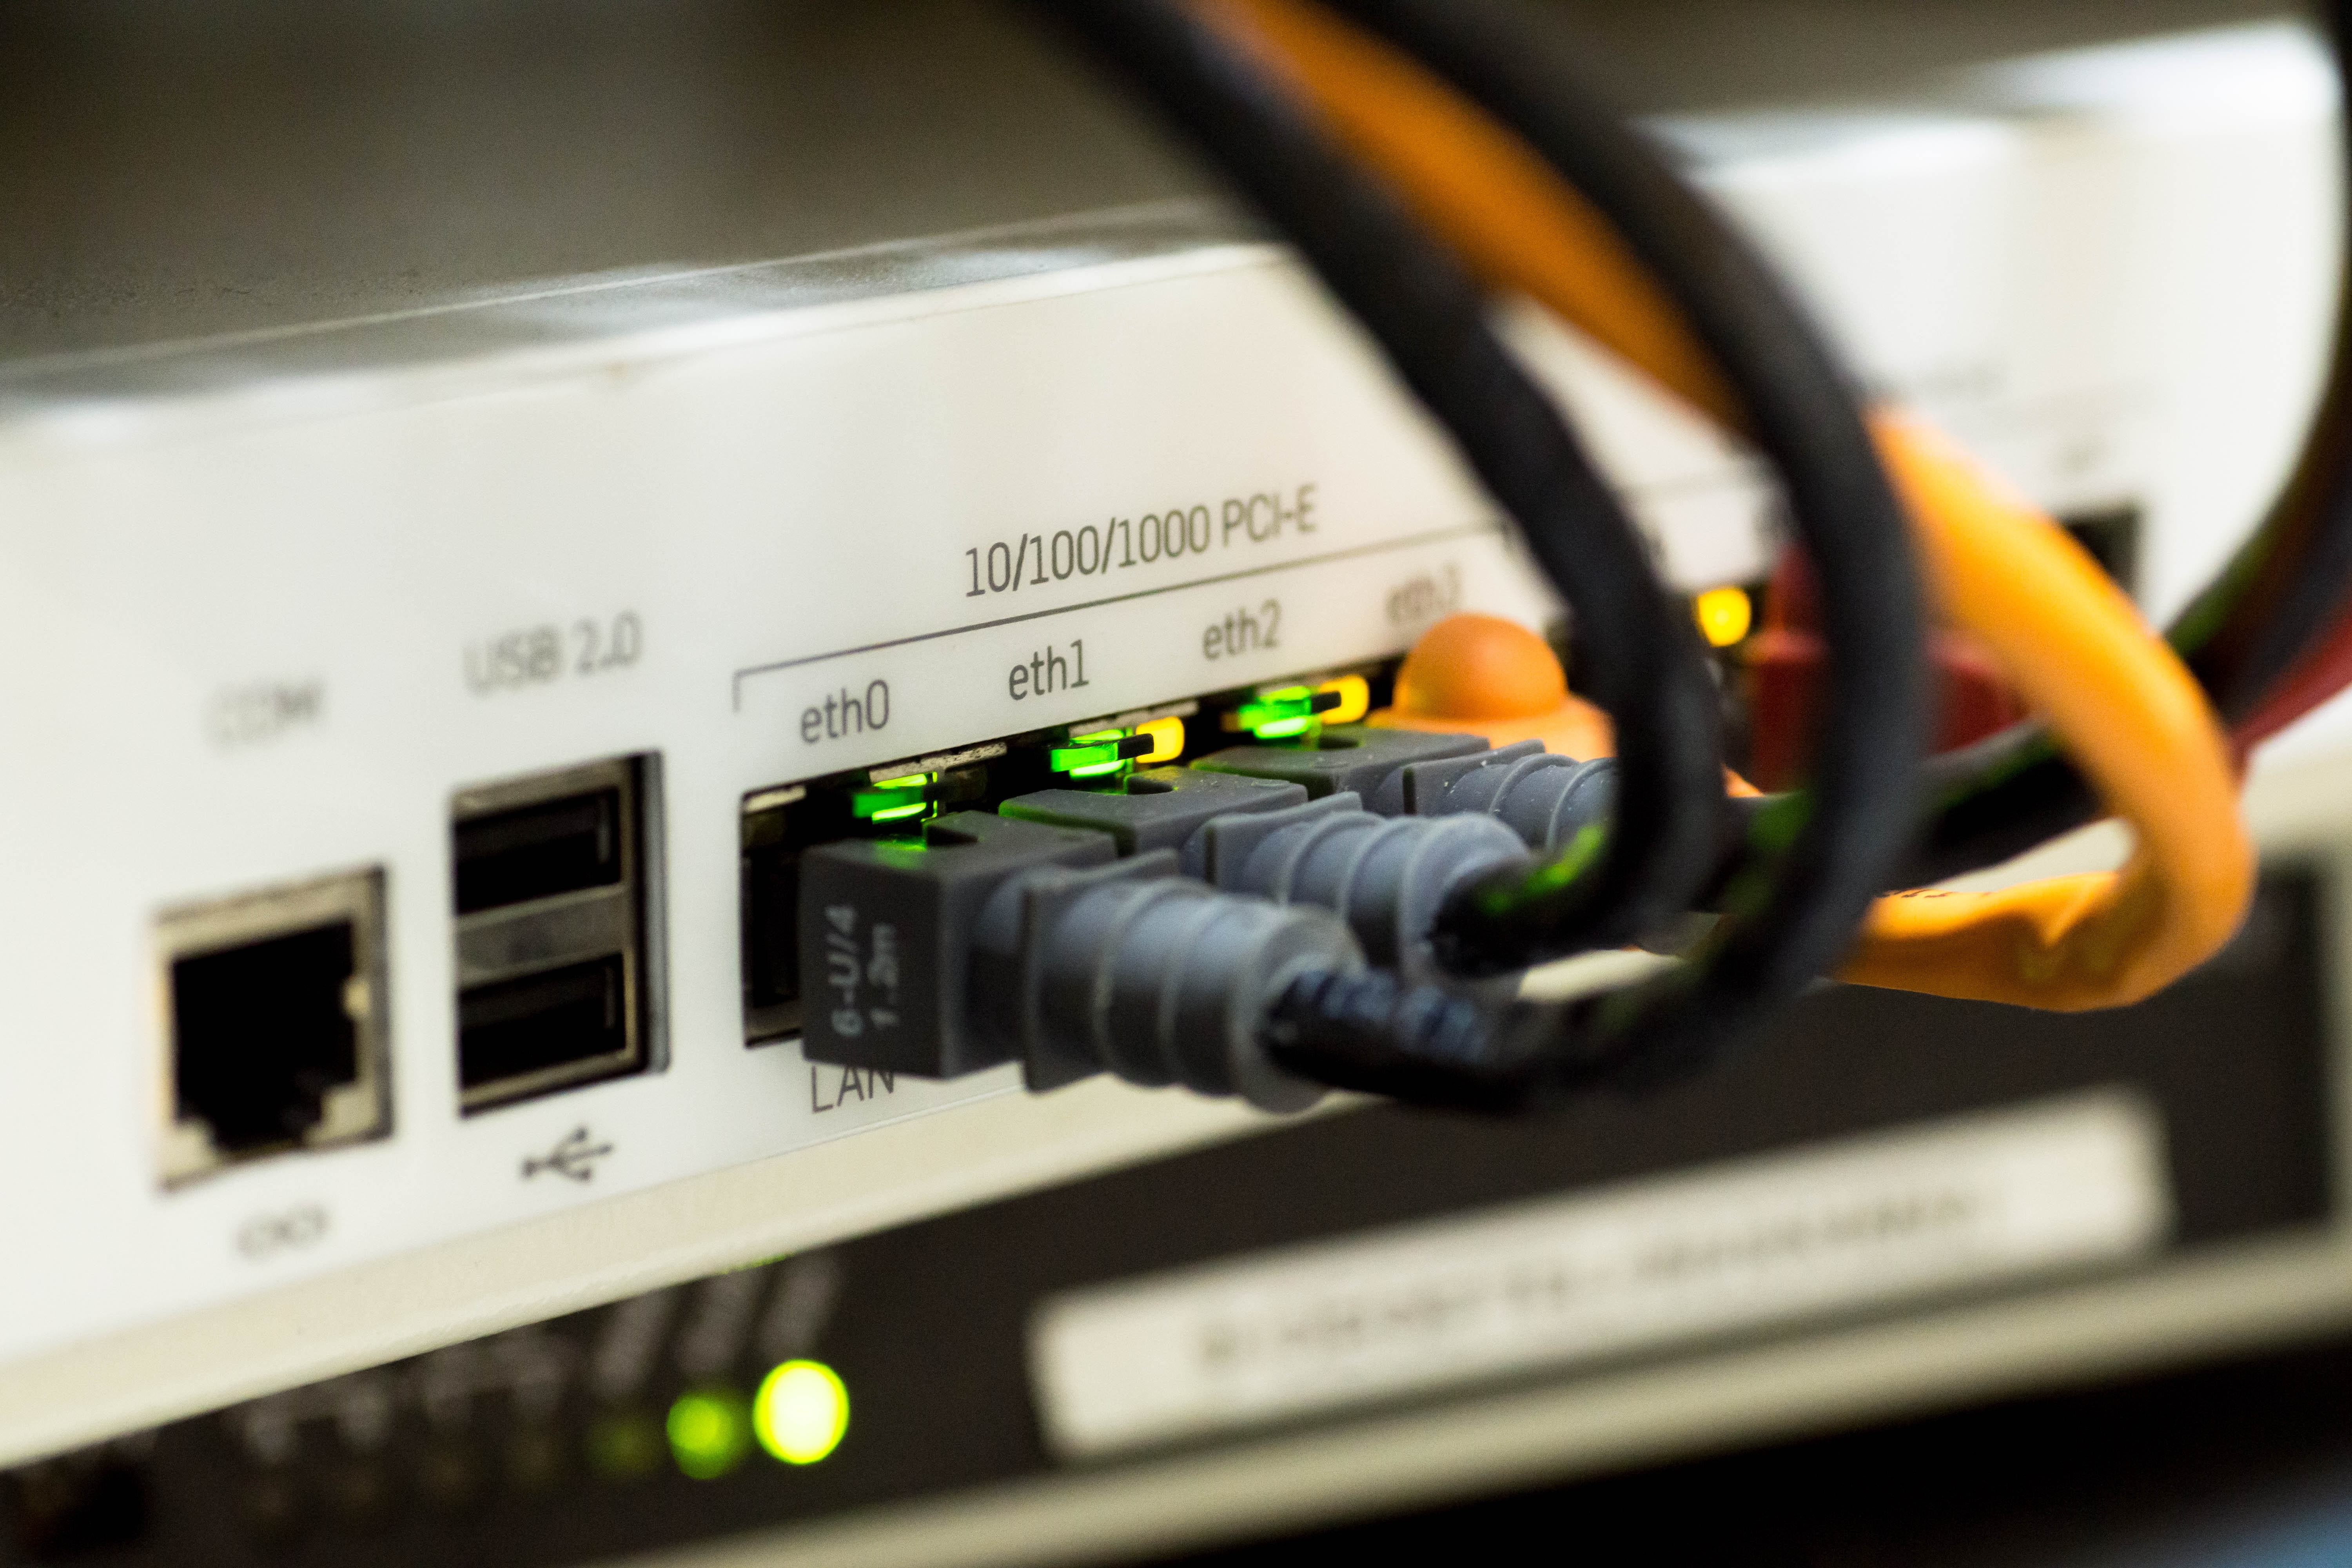 Multiple ethernet cables plugged into a router to access high-speed broadband Internet